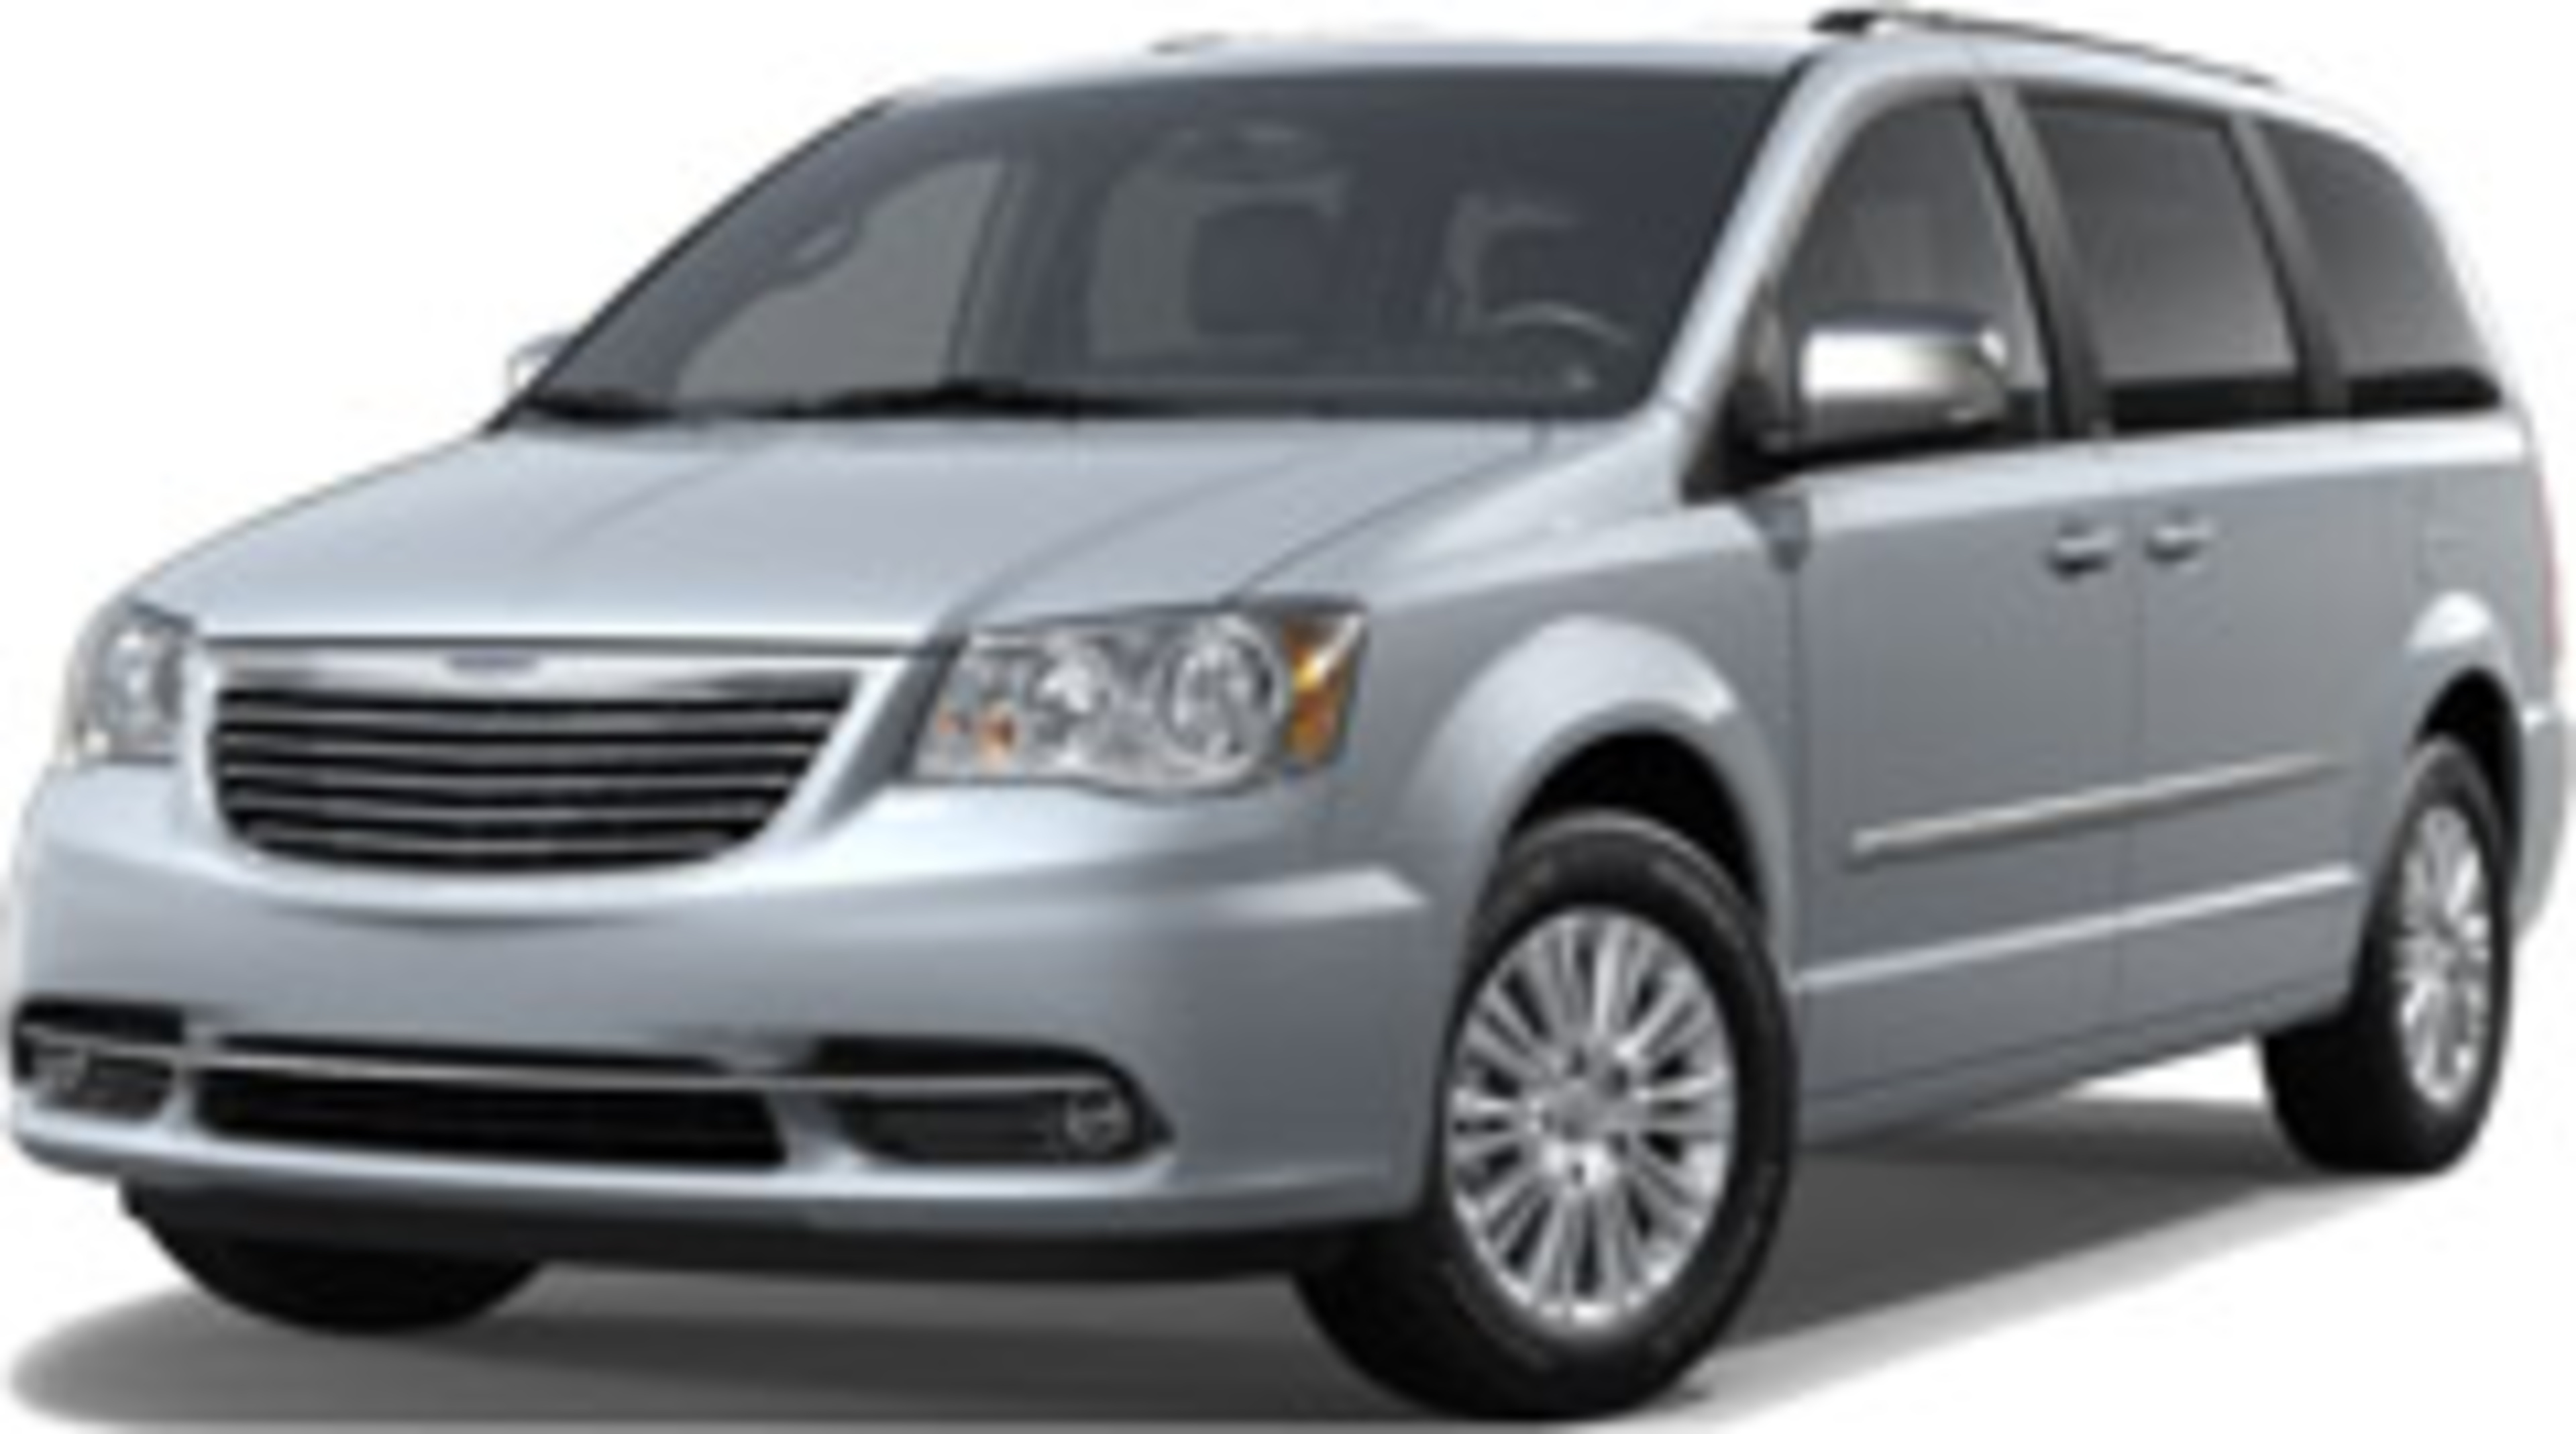 2016 Chrysler Town & Country Service and Repair Manual